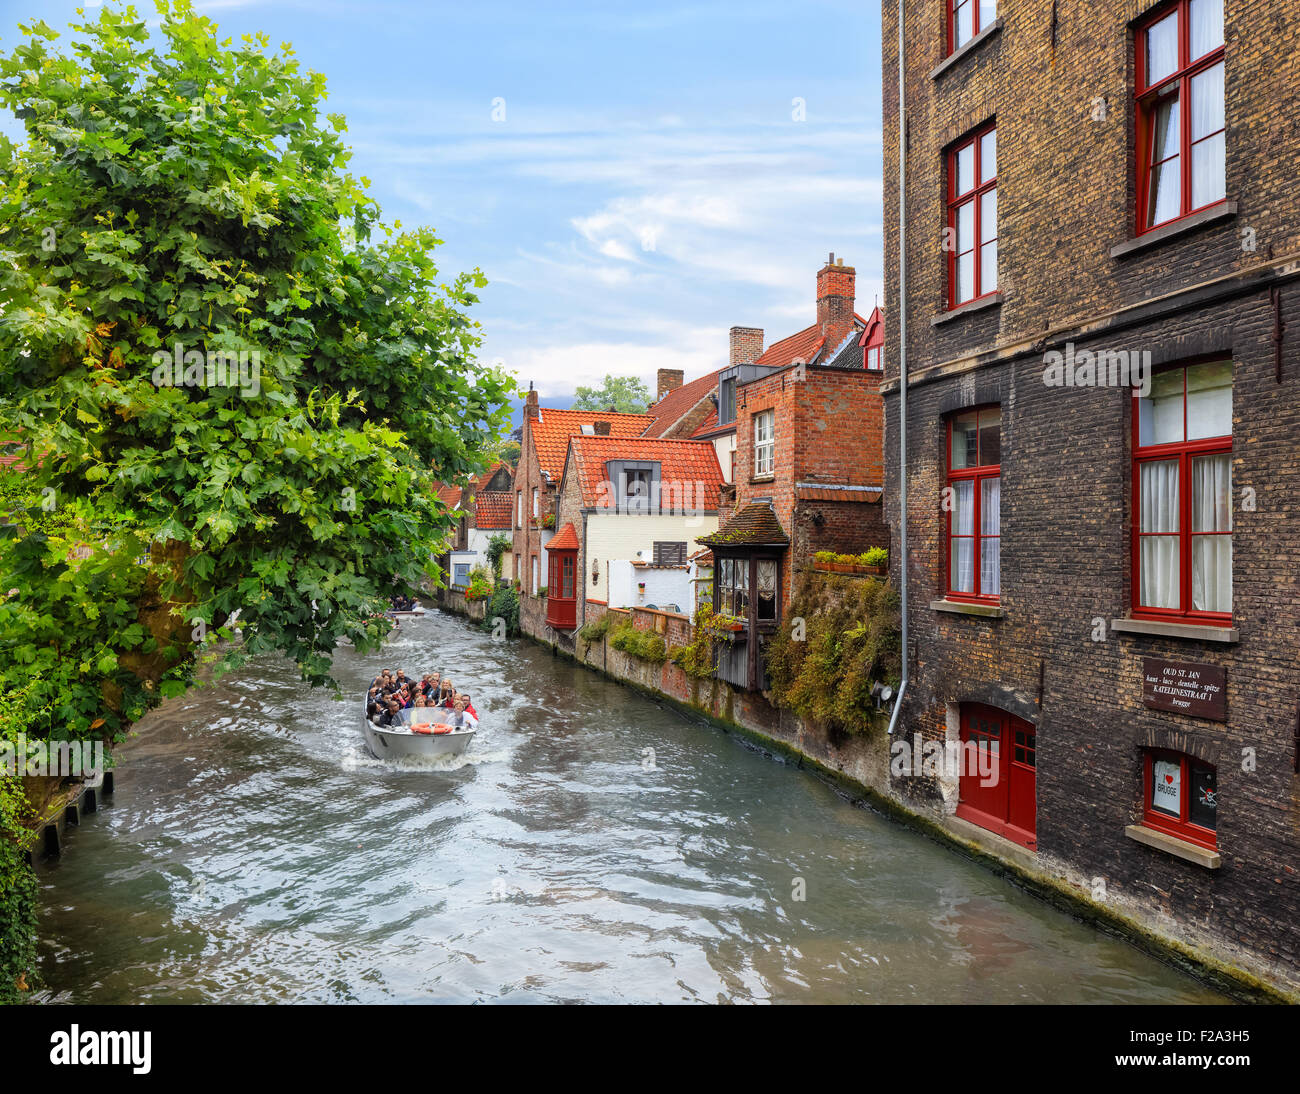 Bruges, Belgium - Aug 18, 2015: Tourists taking boat tour around medieval canals Stock Photo